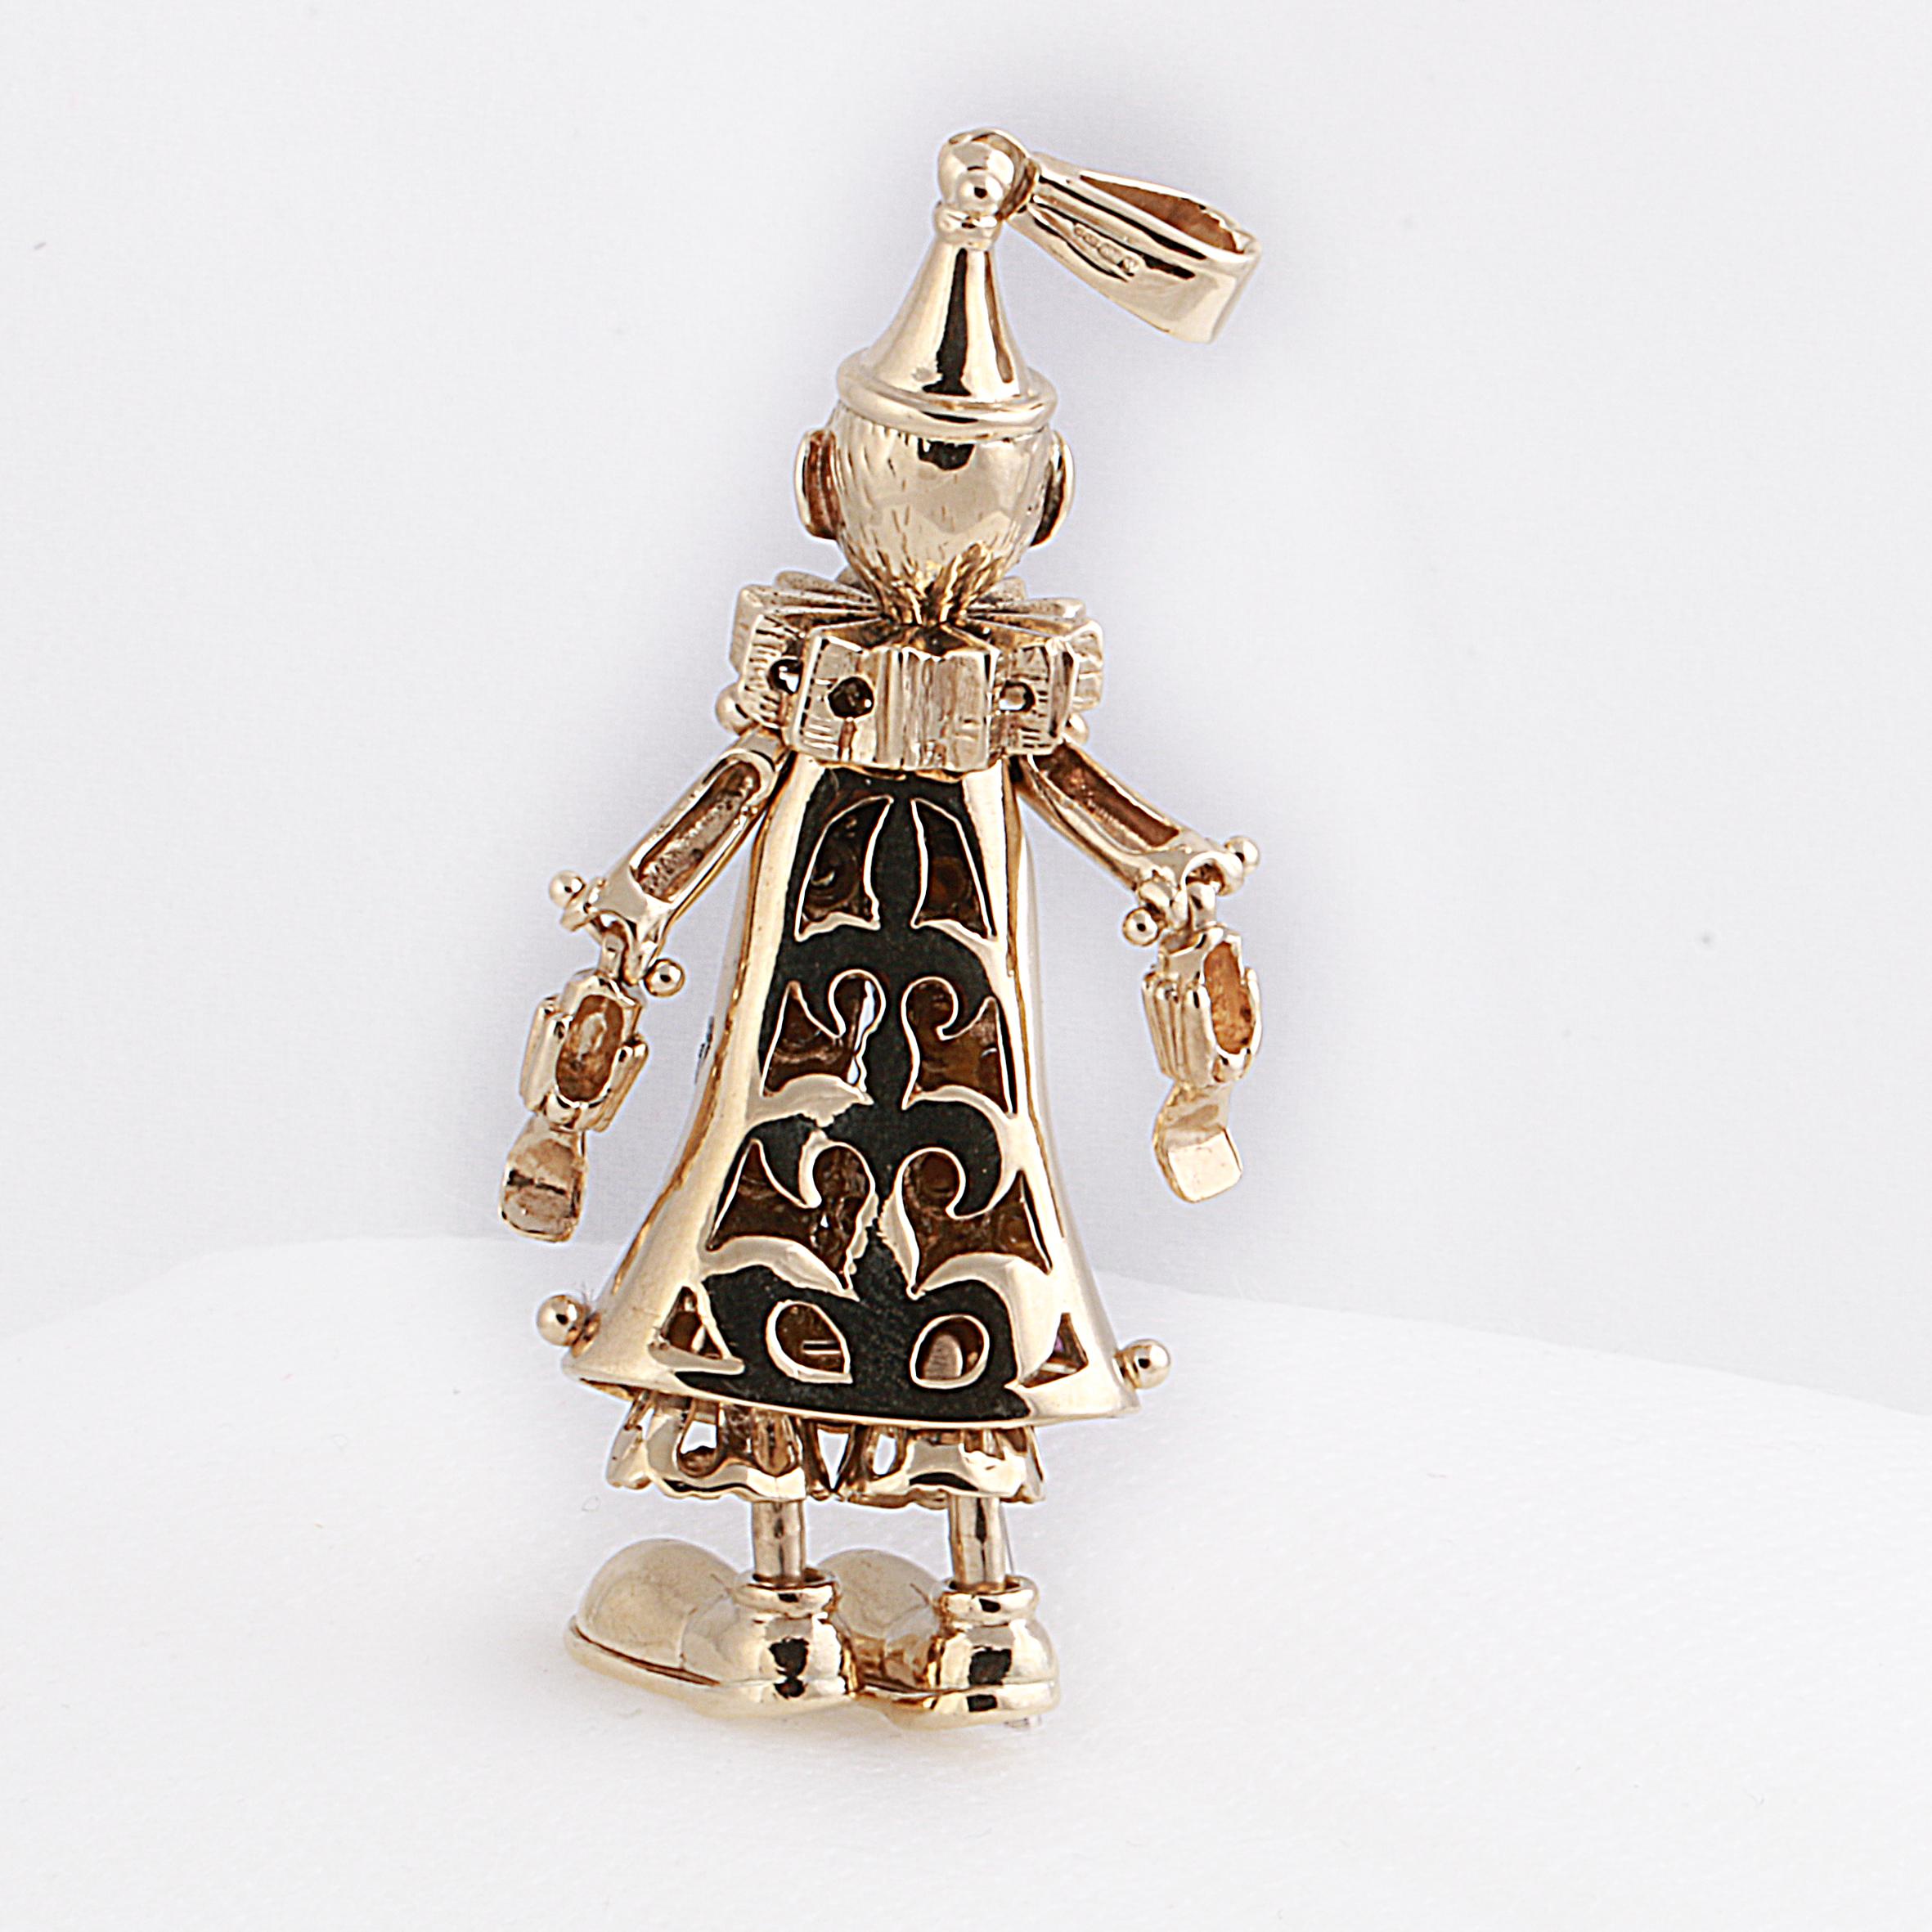 An important Pendant that will make us Happy! a truly well symbolized 